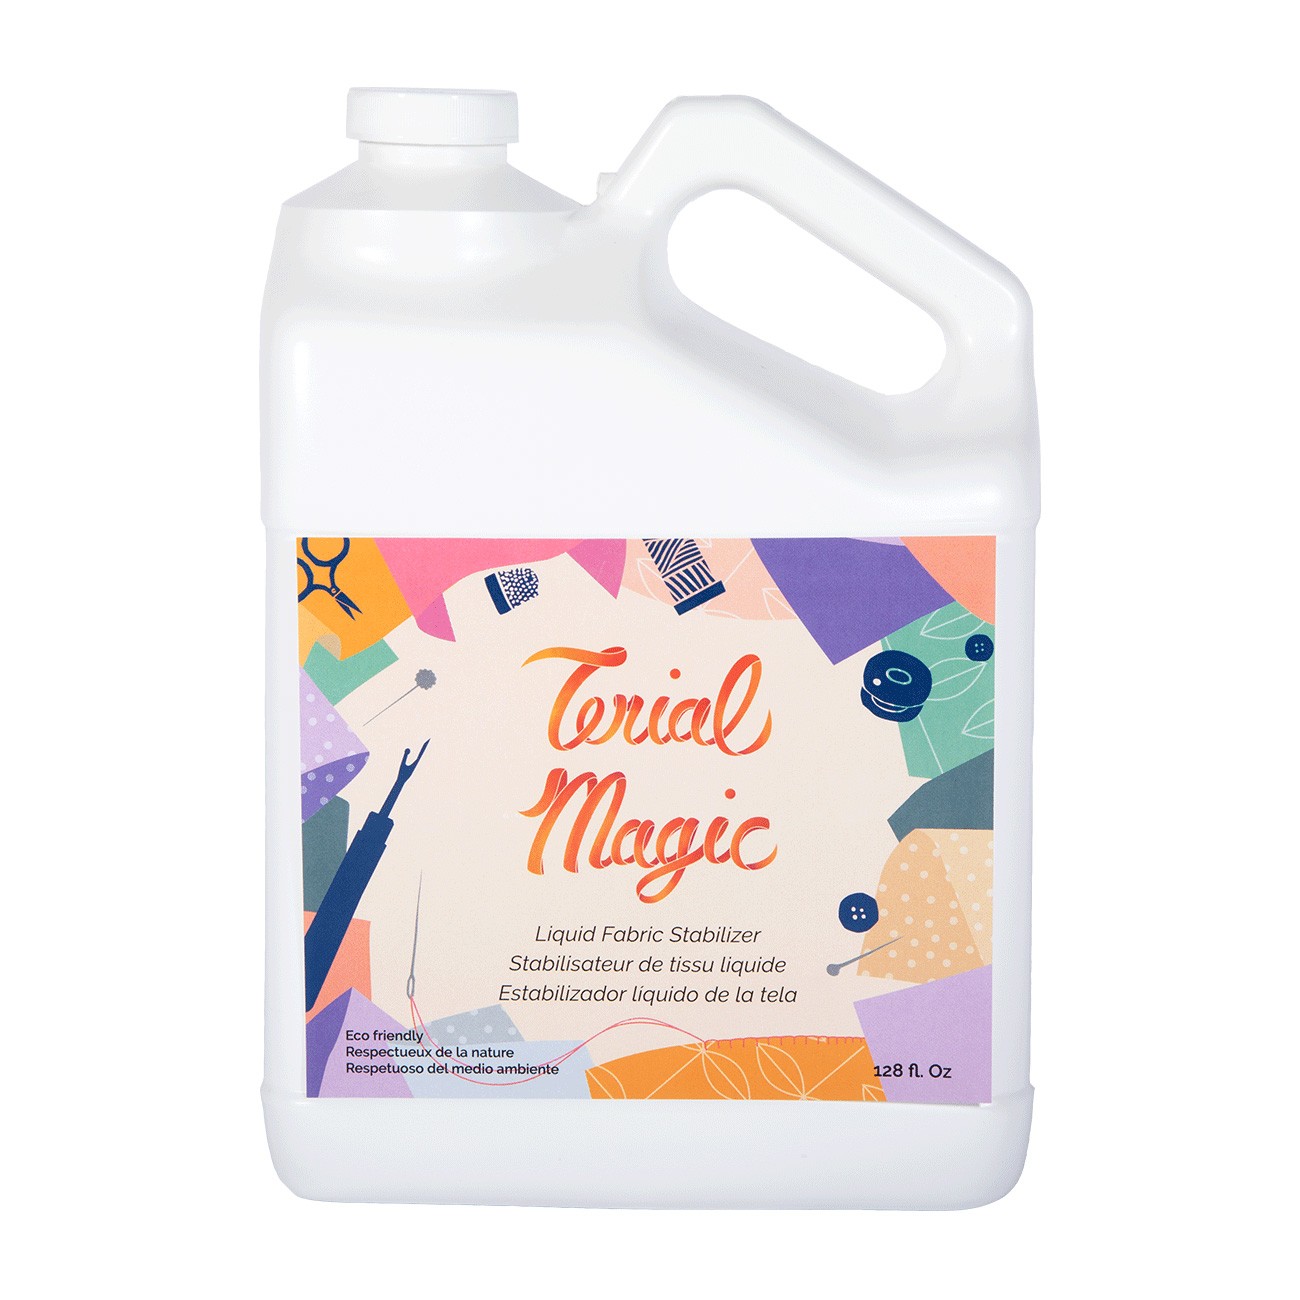 Terial Magic wholesale products